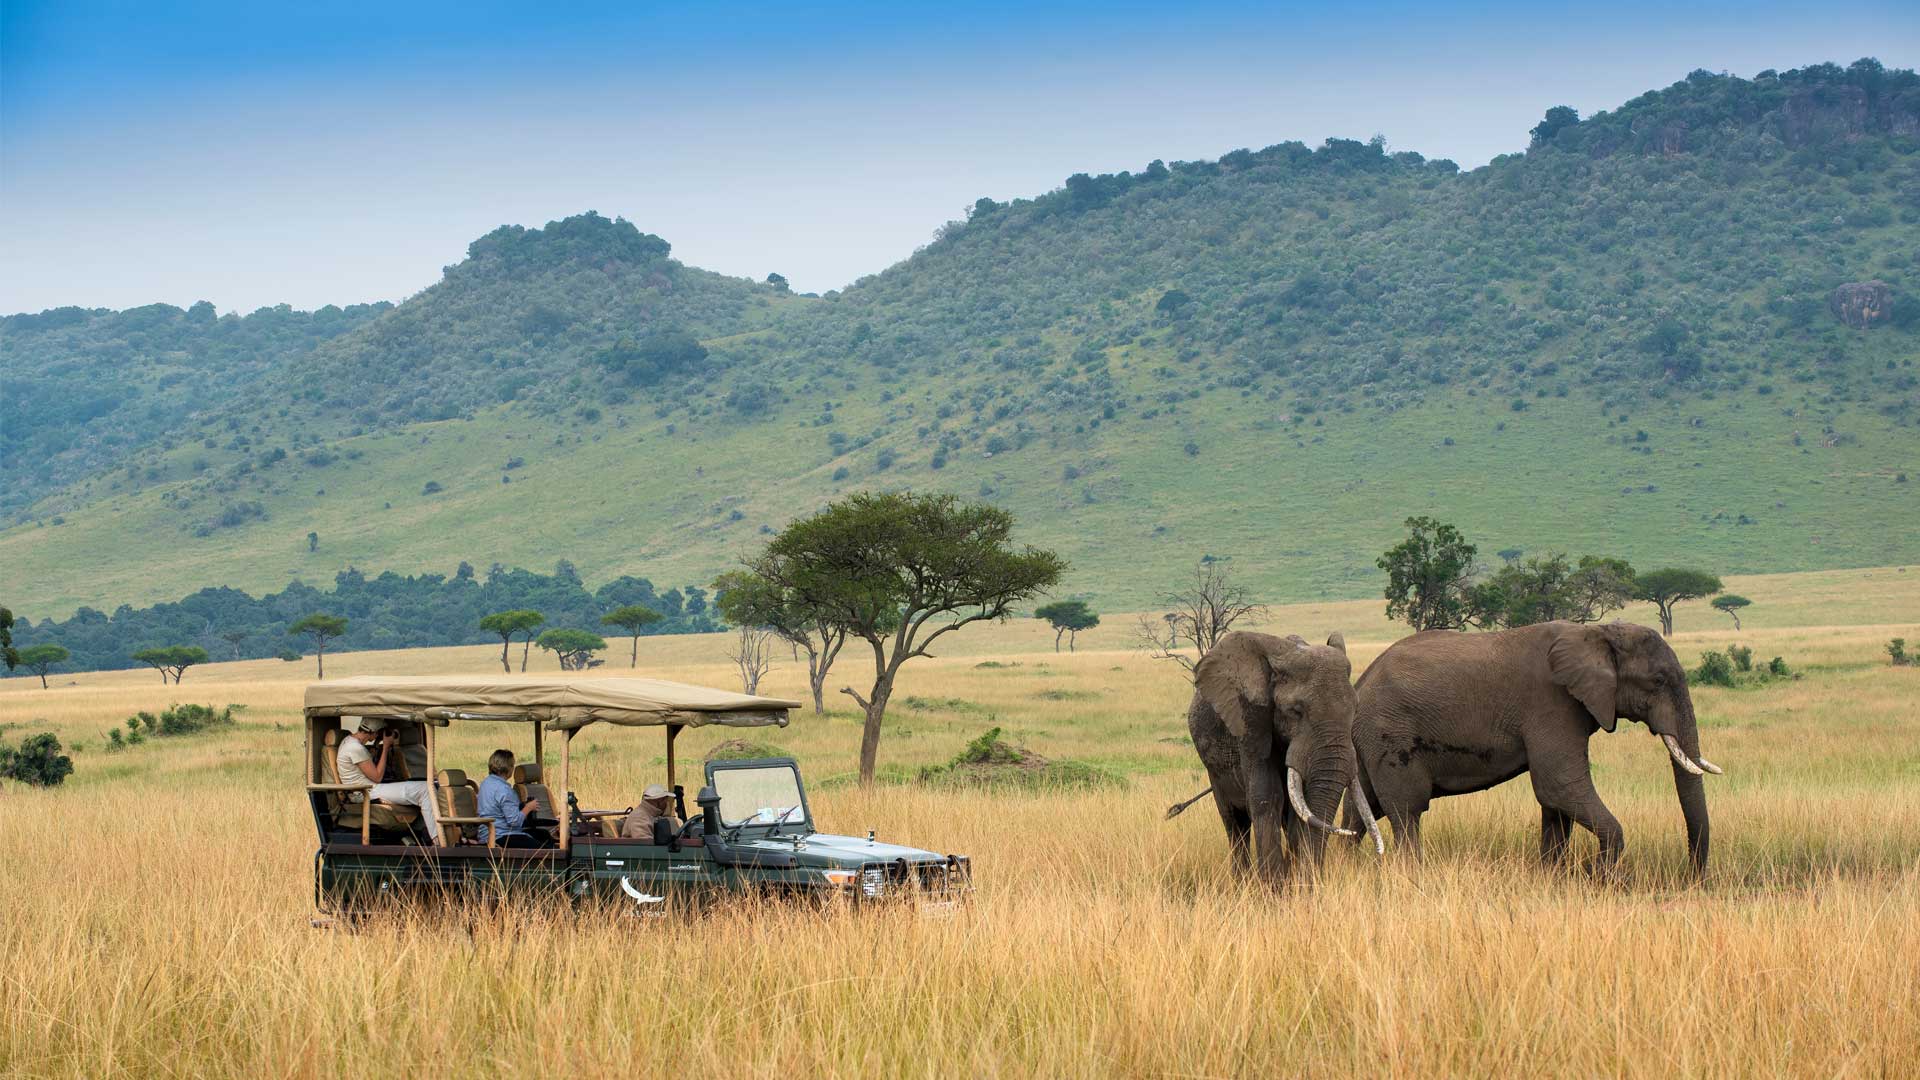 Explore the Best of Kenya on our 11 day tour